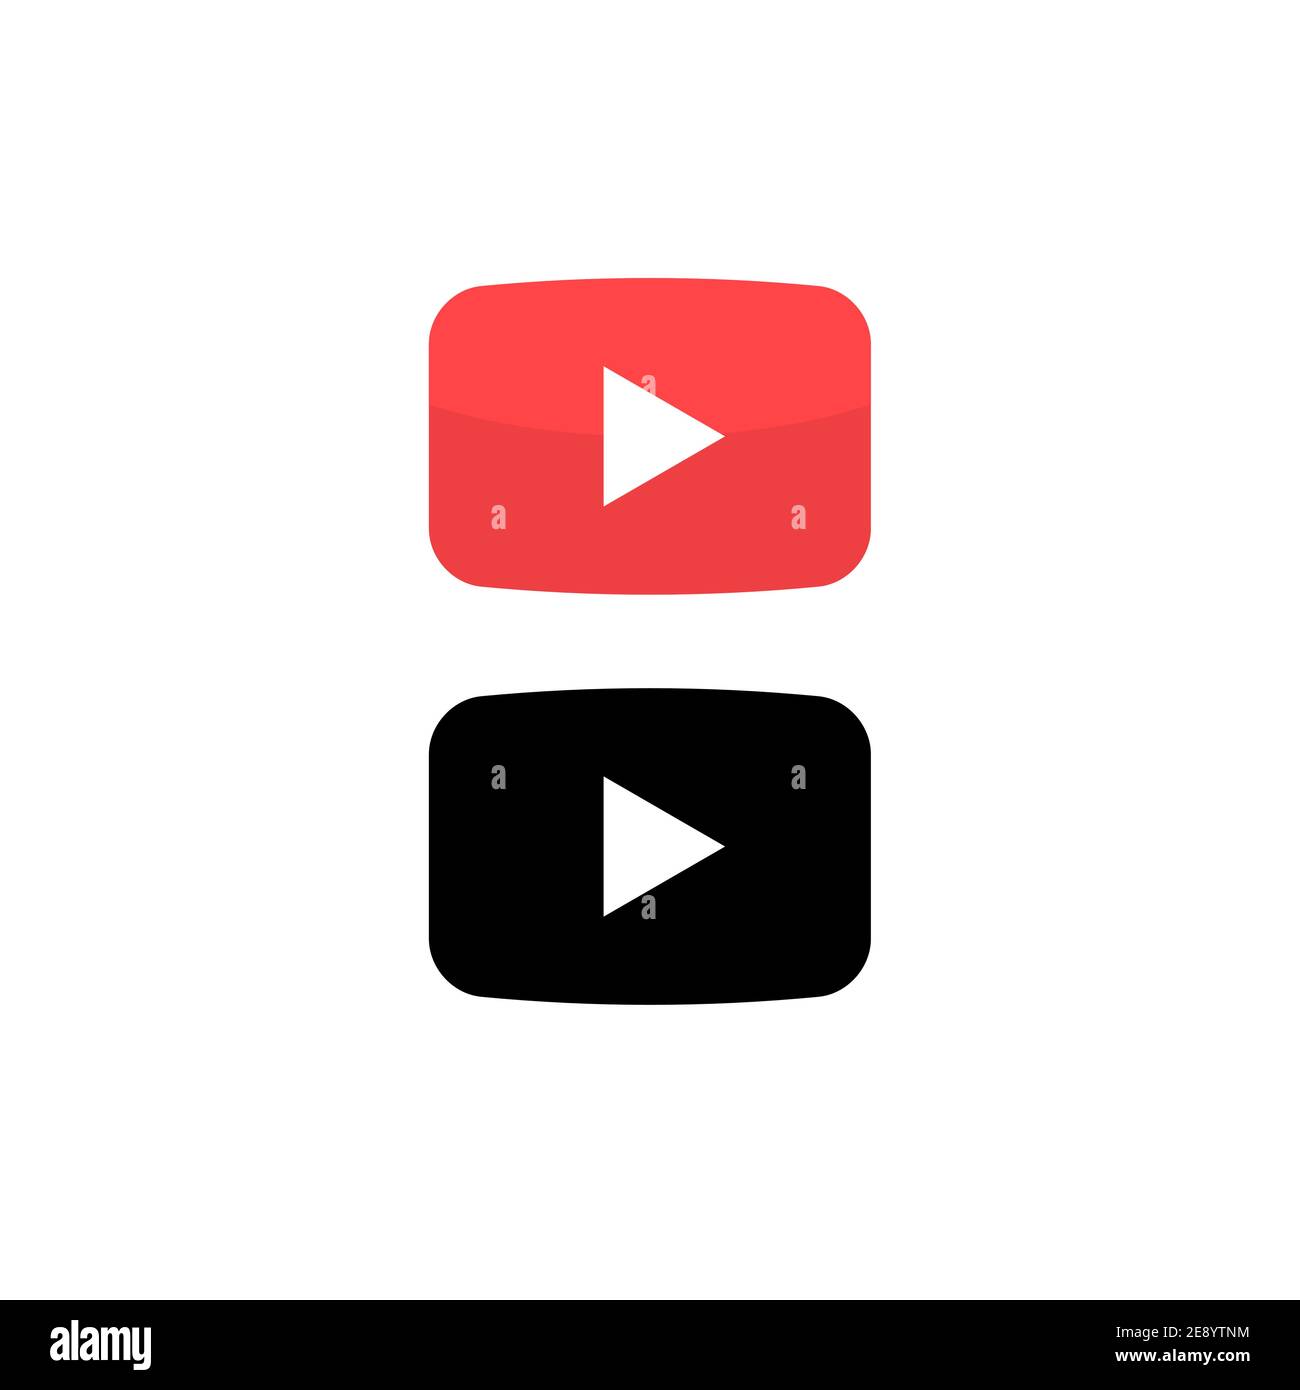 Play Now Button - Click on the Red Button Stock Vector